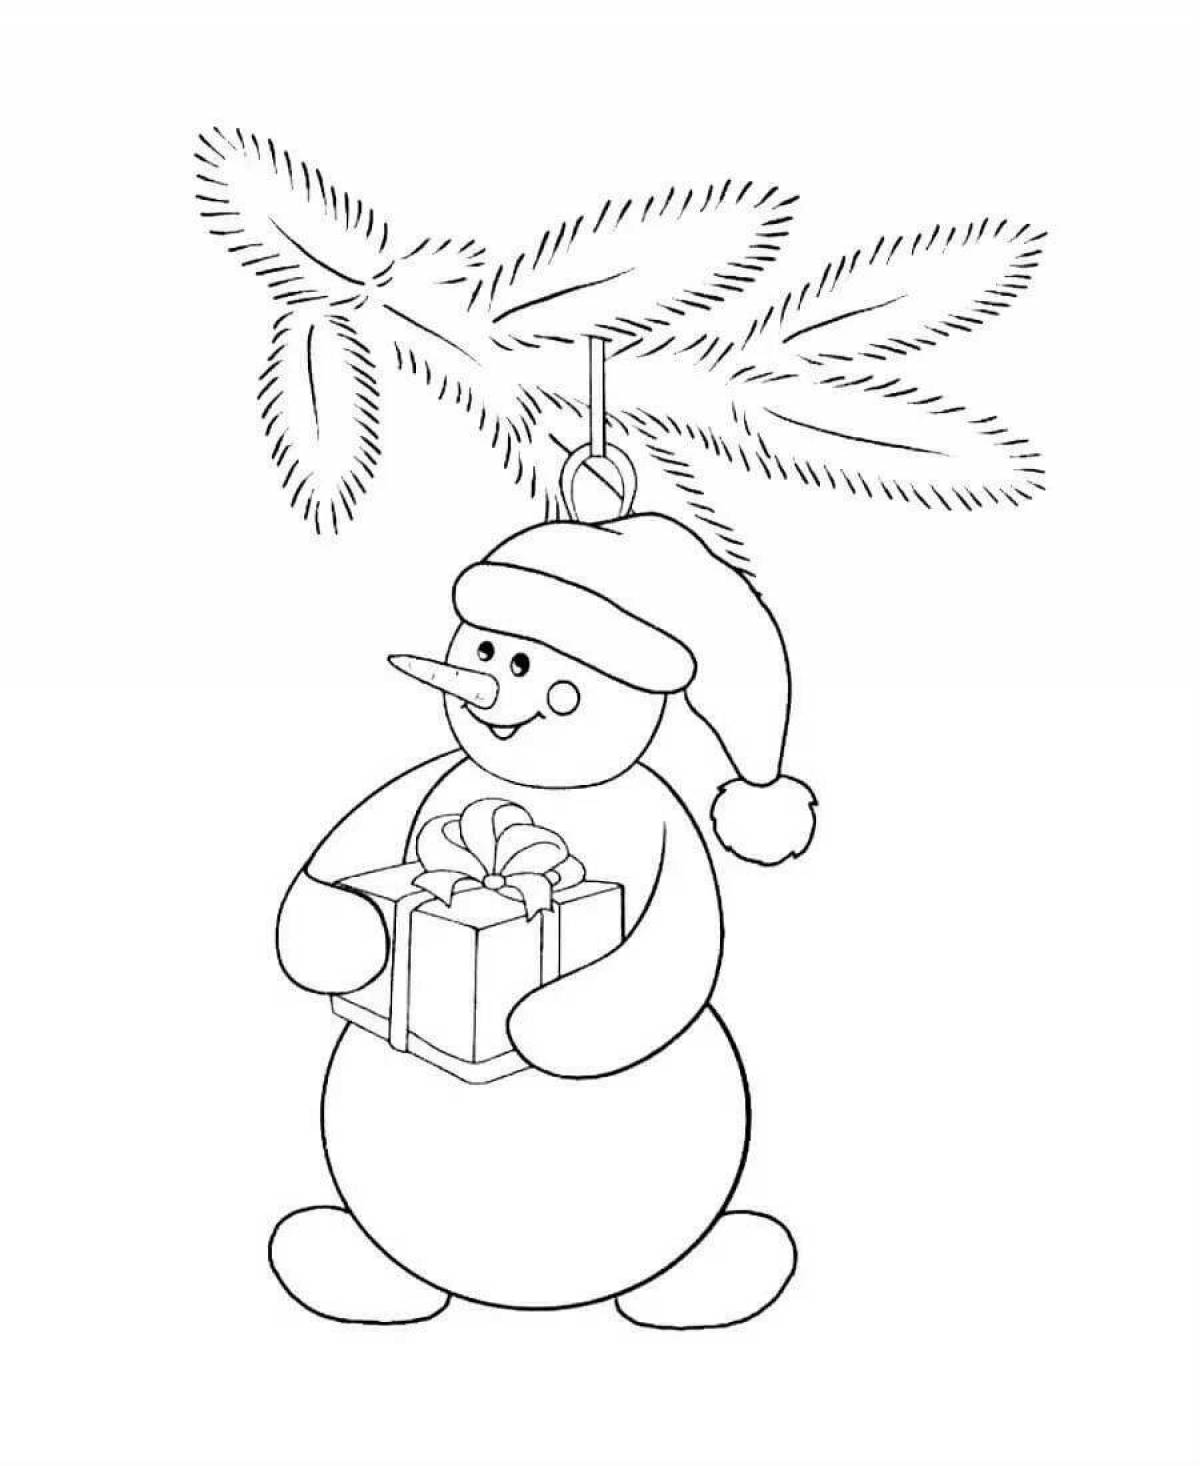 Exotic Christmas snowman coloring page